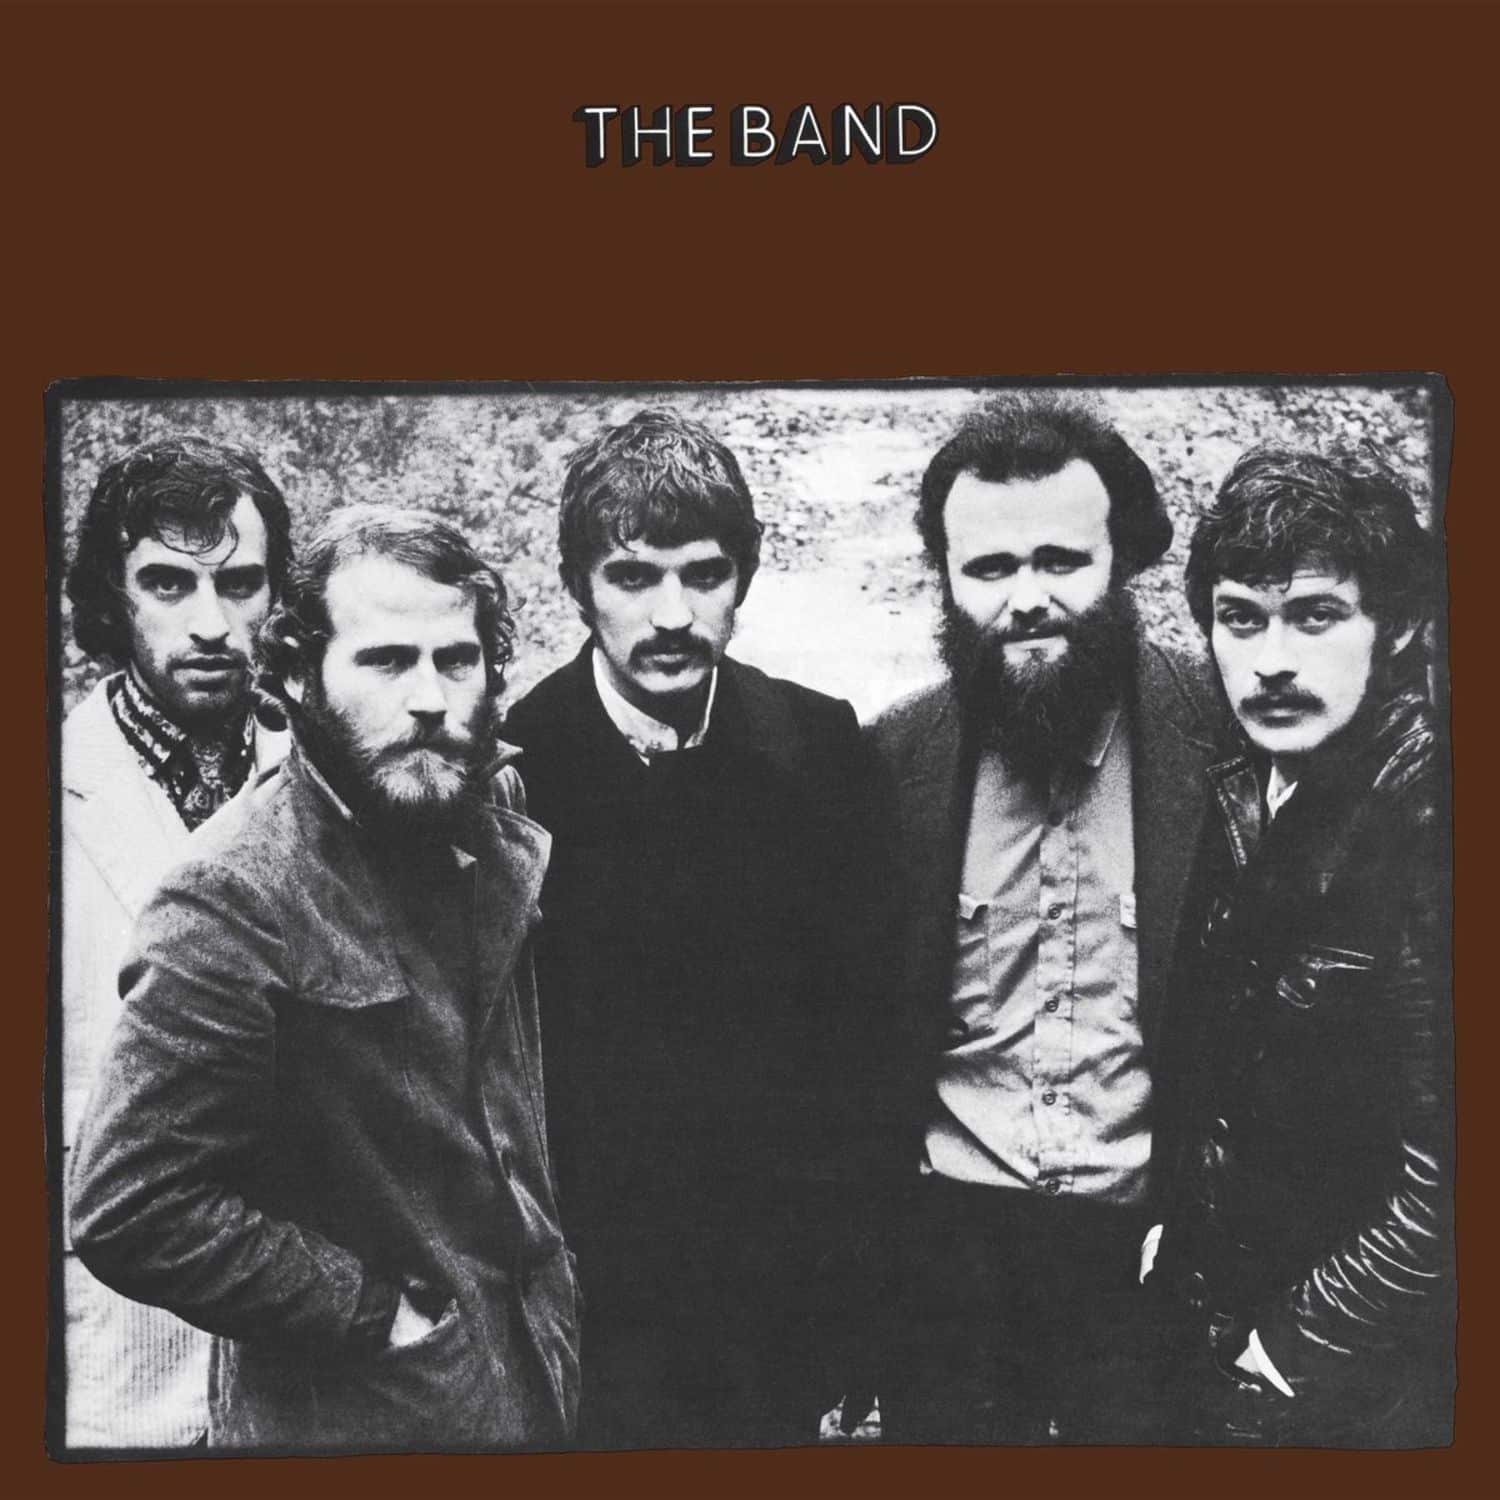 The Band - THE BAND 